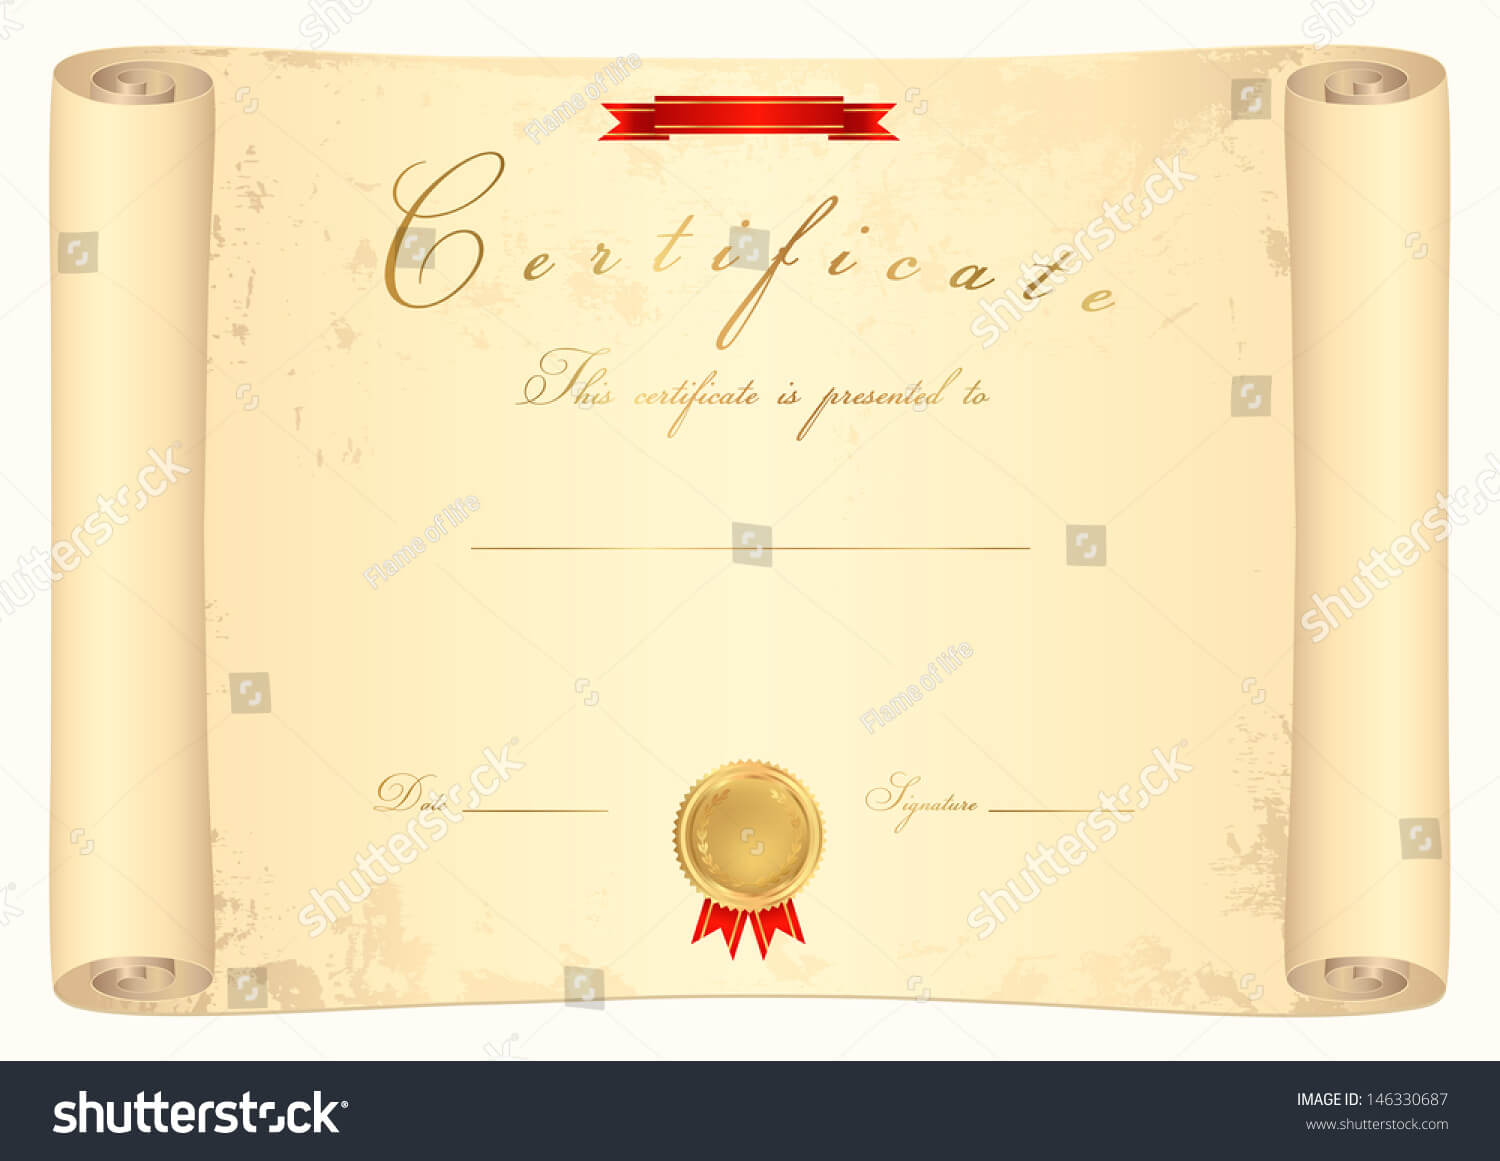 Scroll Certificate Completion Template Sample Background In Scroll Certificate Templates